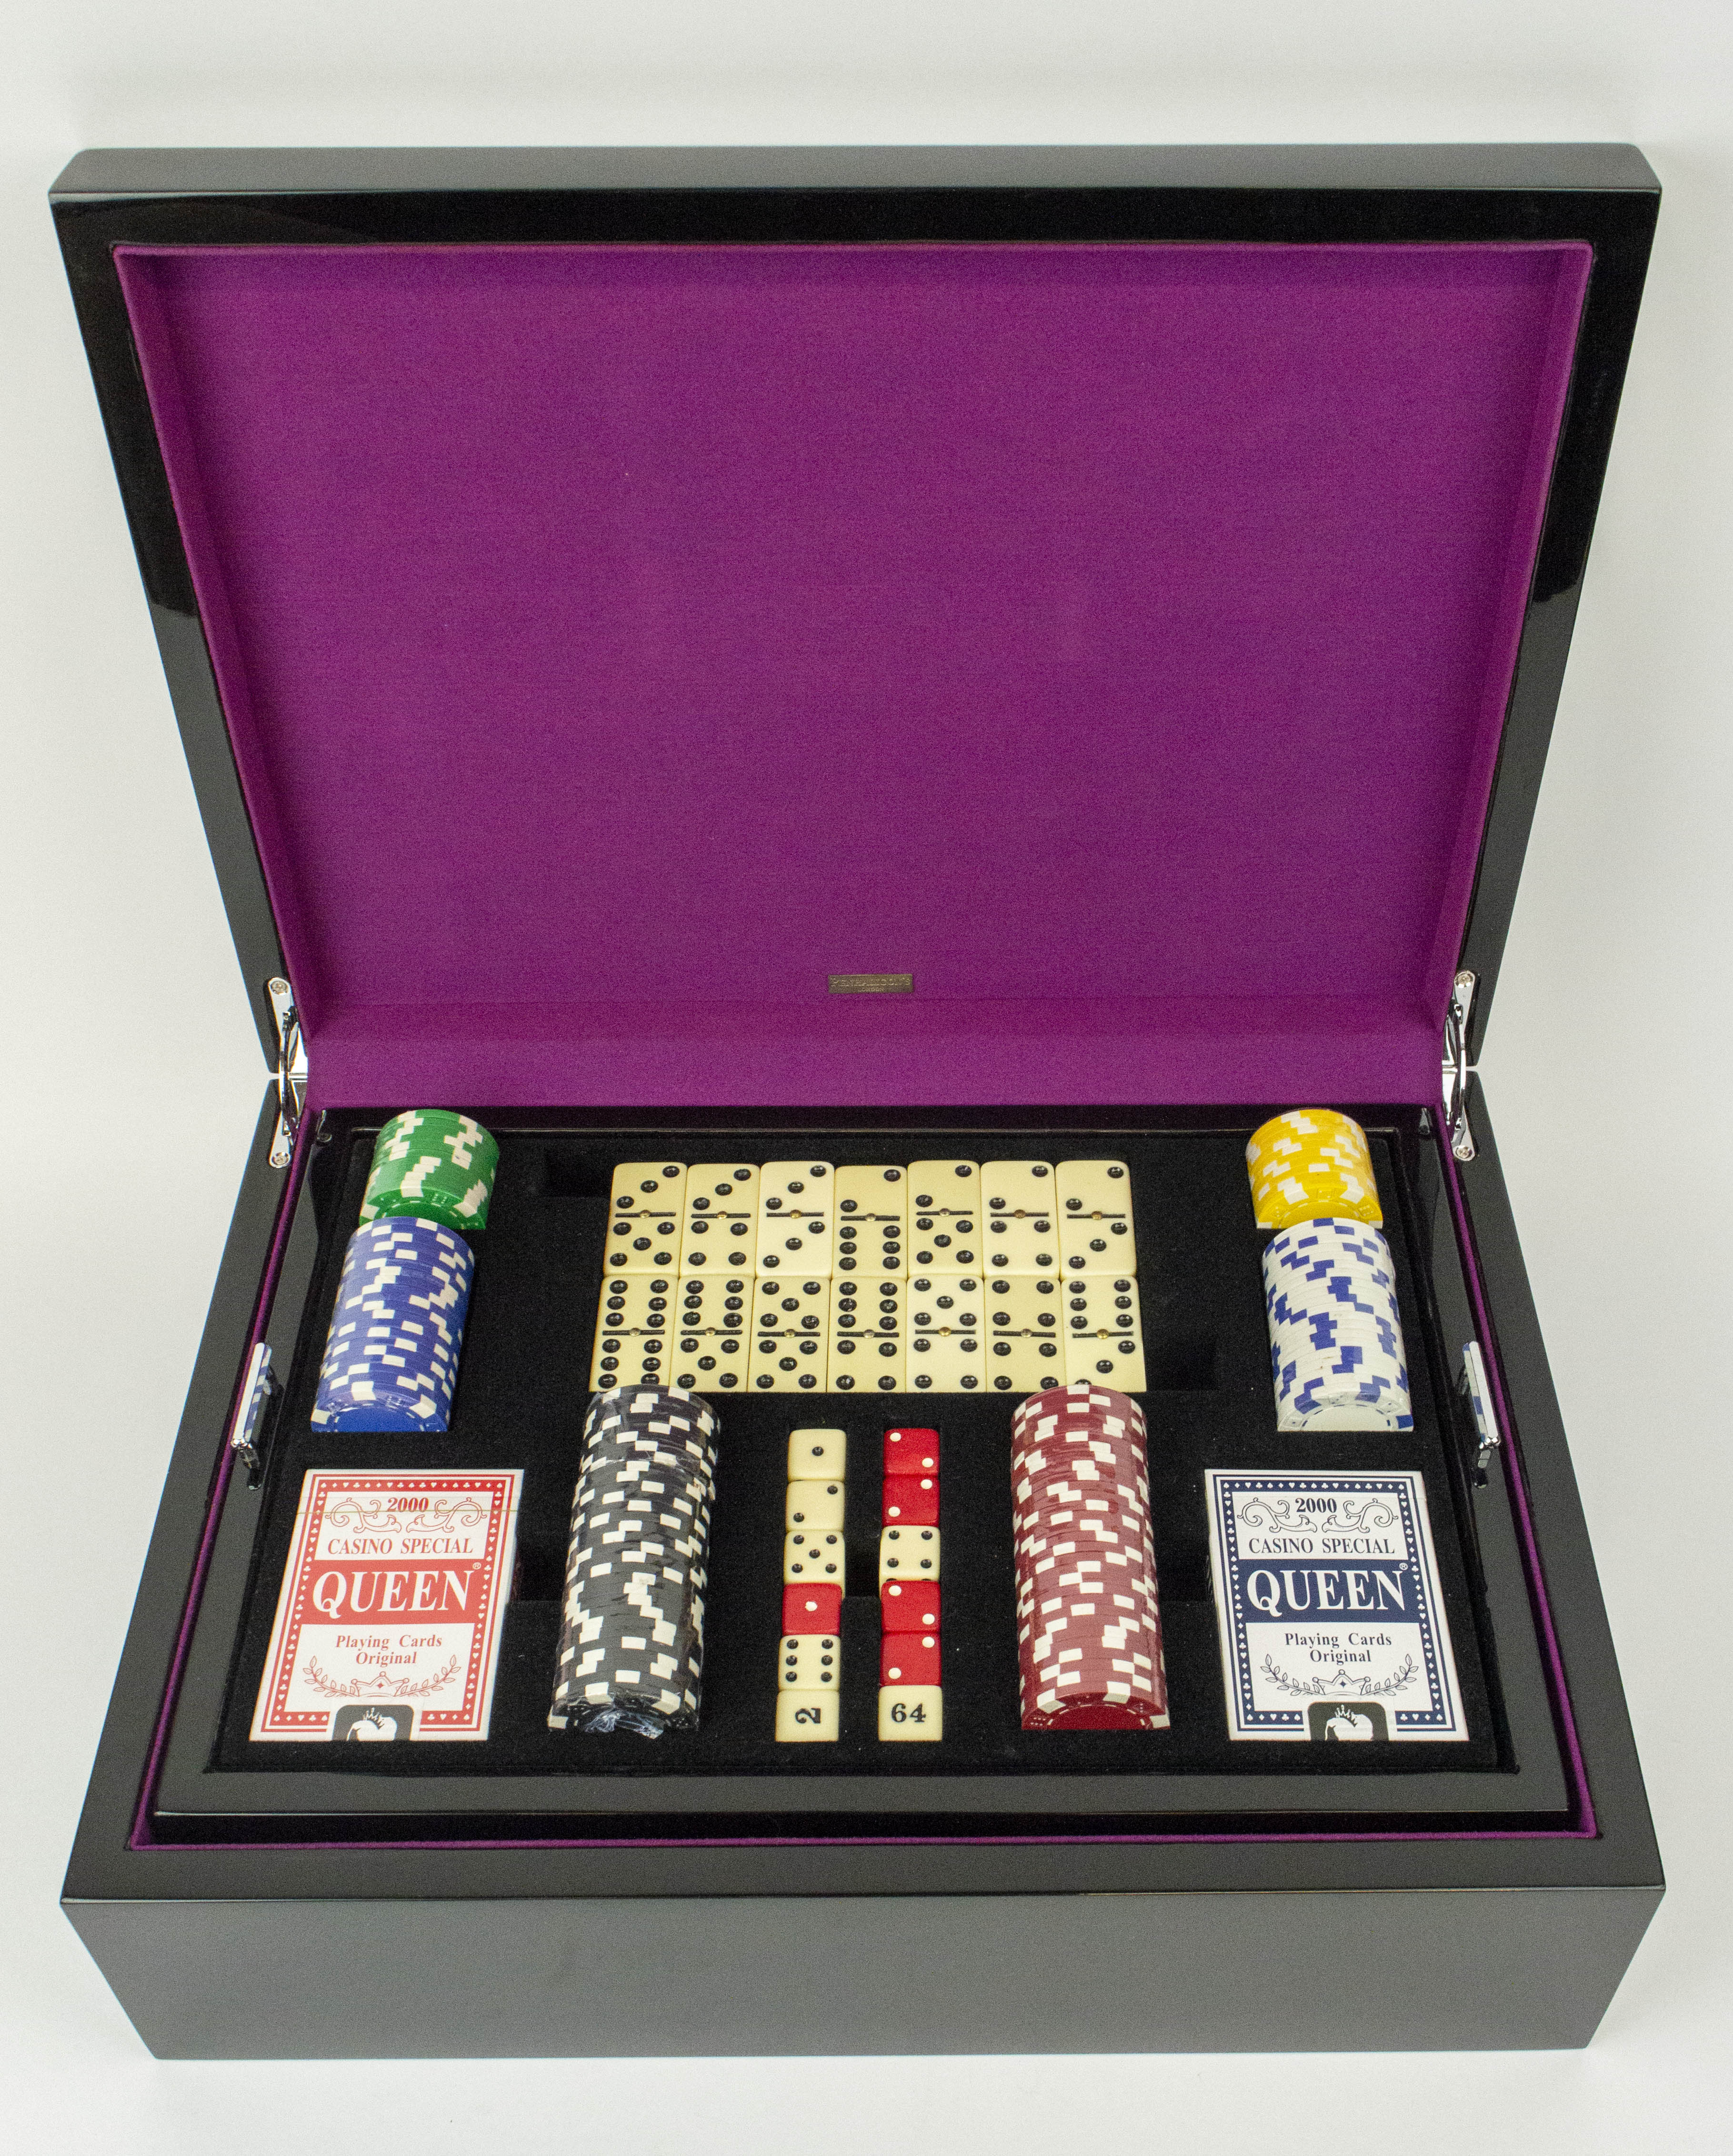 PENHALIGON'S GAMES BOX, black lacquered fitted tray with card sets dice, chips dominos and folding - Image 2 of 15